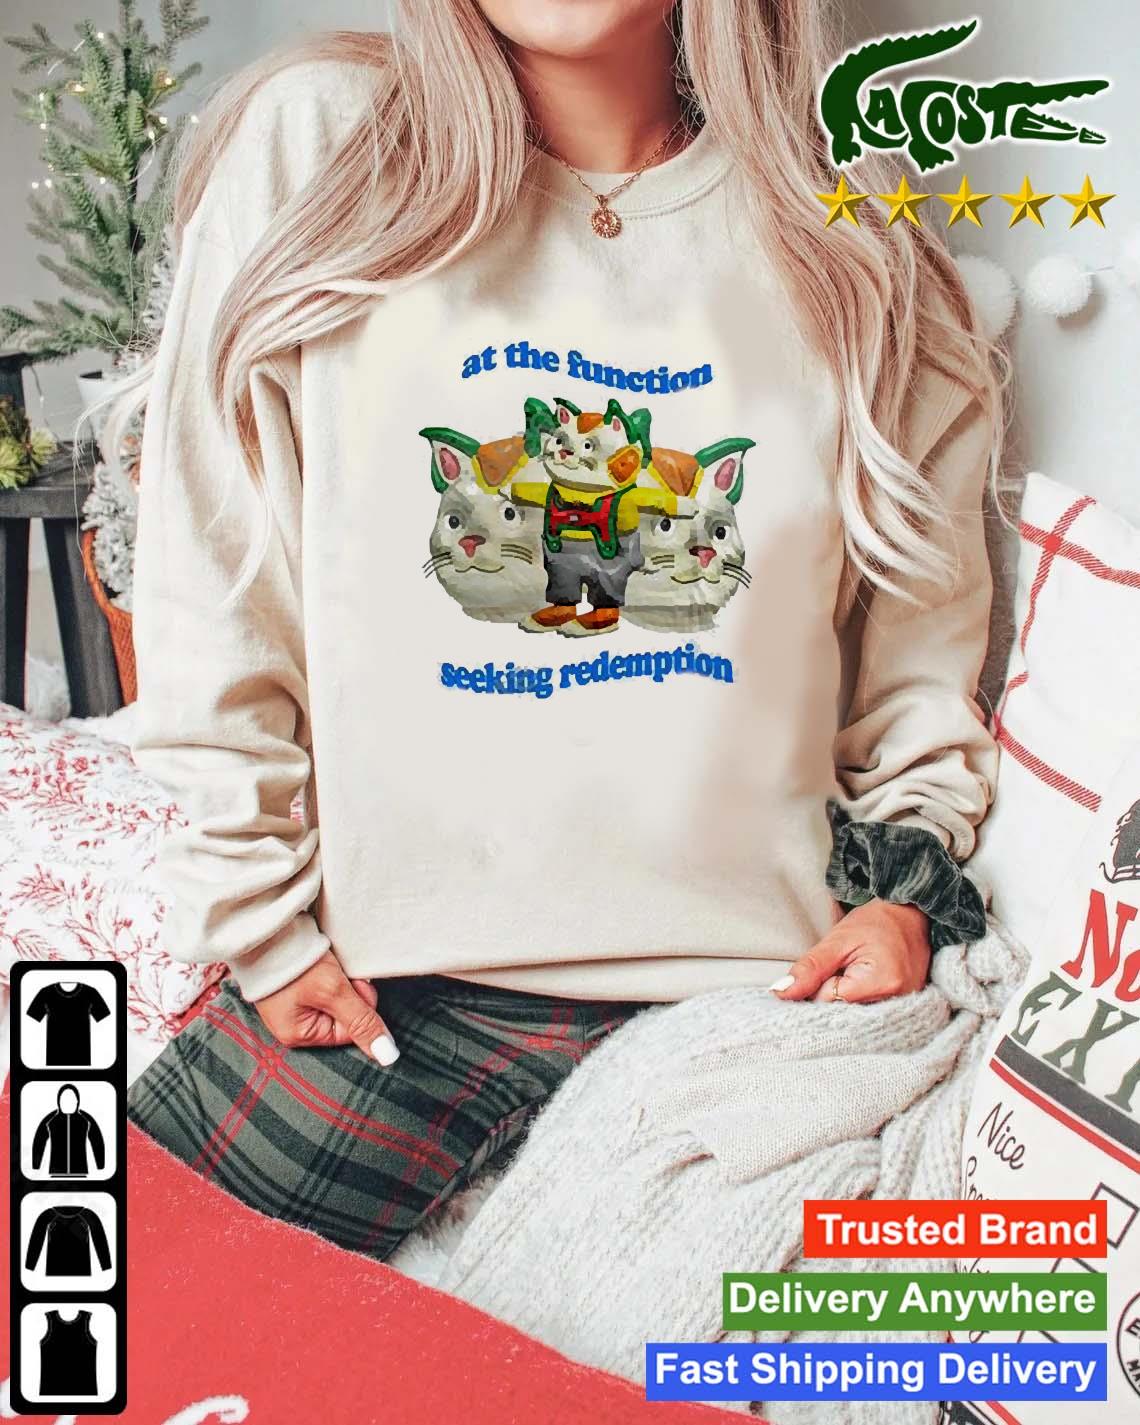 Artbyjmcgg At The Function Seeking Redemption T-s Mockup Sweater